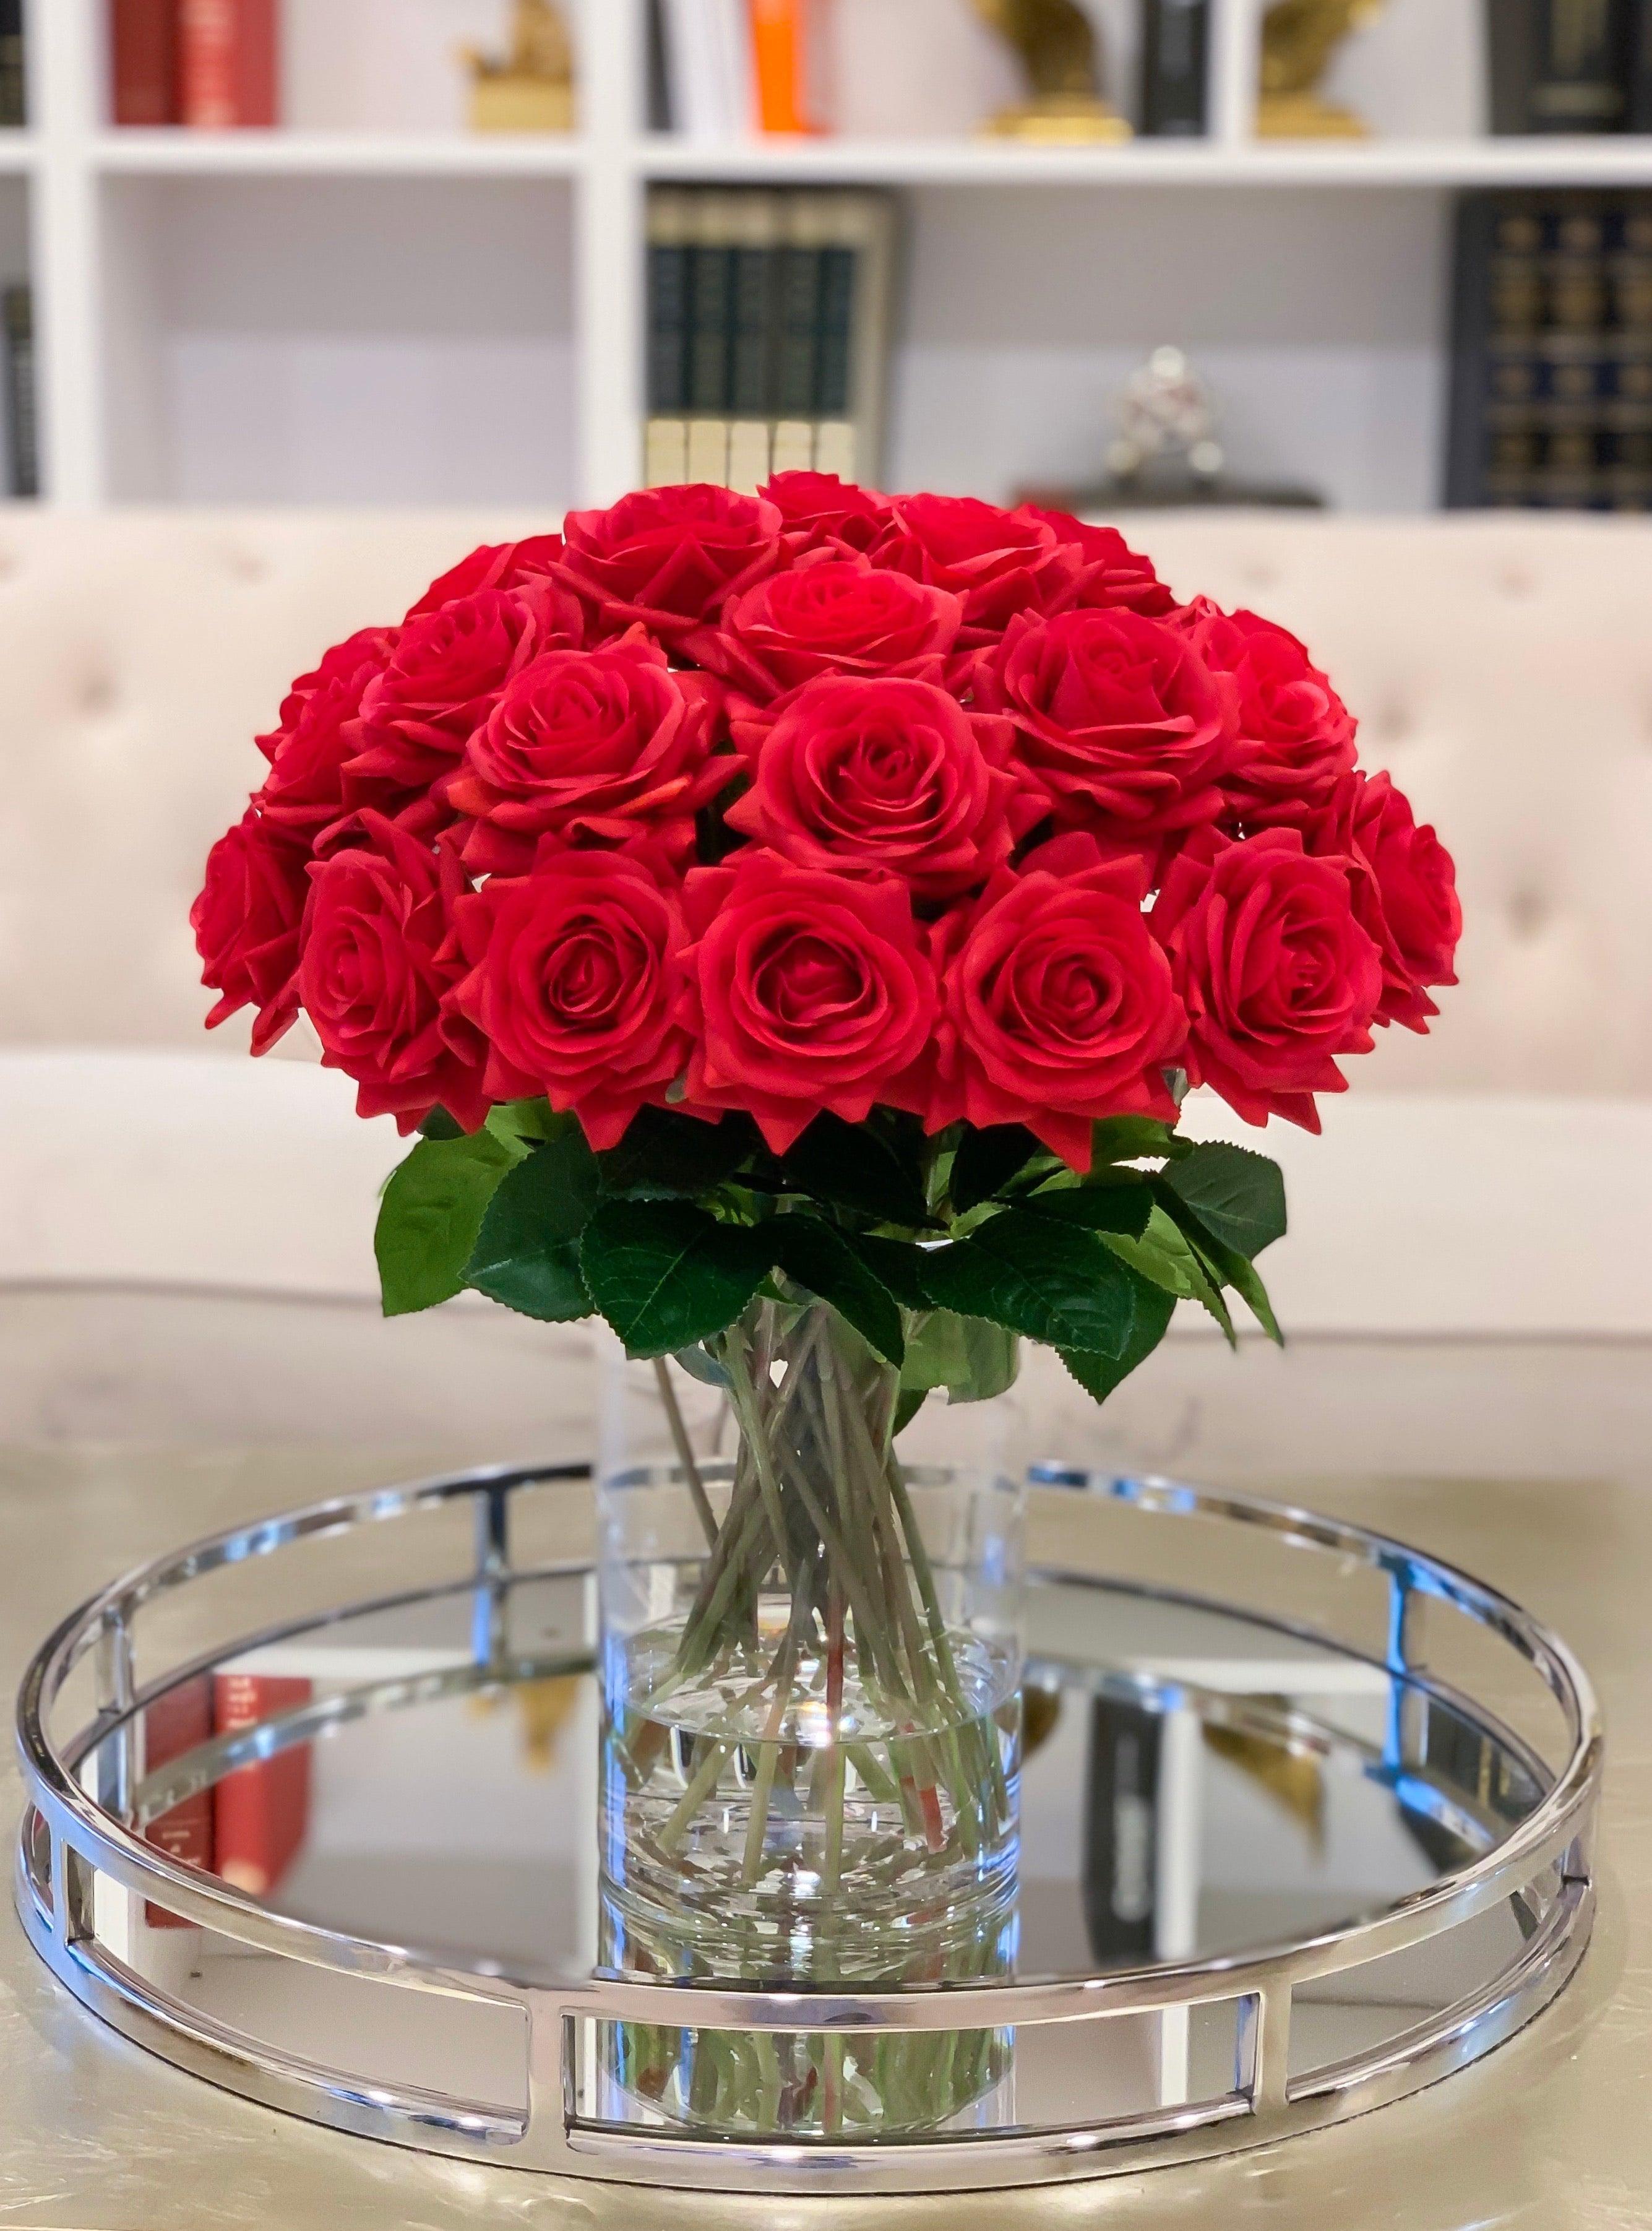 Red Roses Flower Arrangement-Large Rose Arrangement- Real Touch Red Roses -Red Flower Centerpiece for Home Decor-Faux-Silk Rose - Flovery